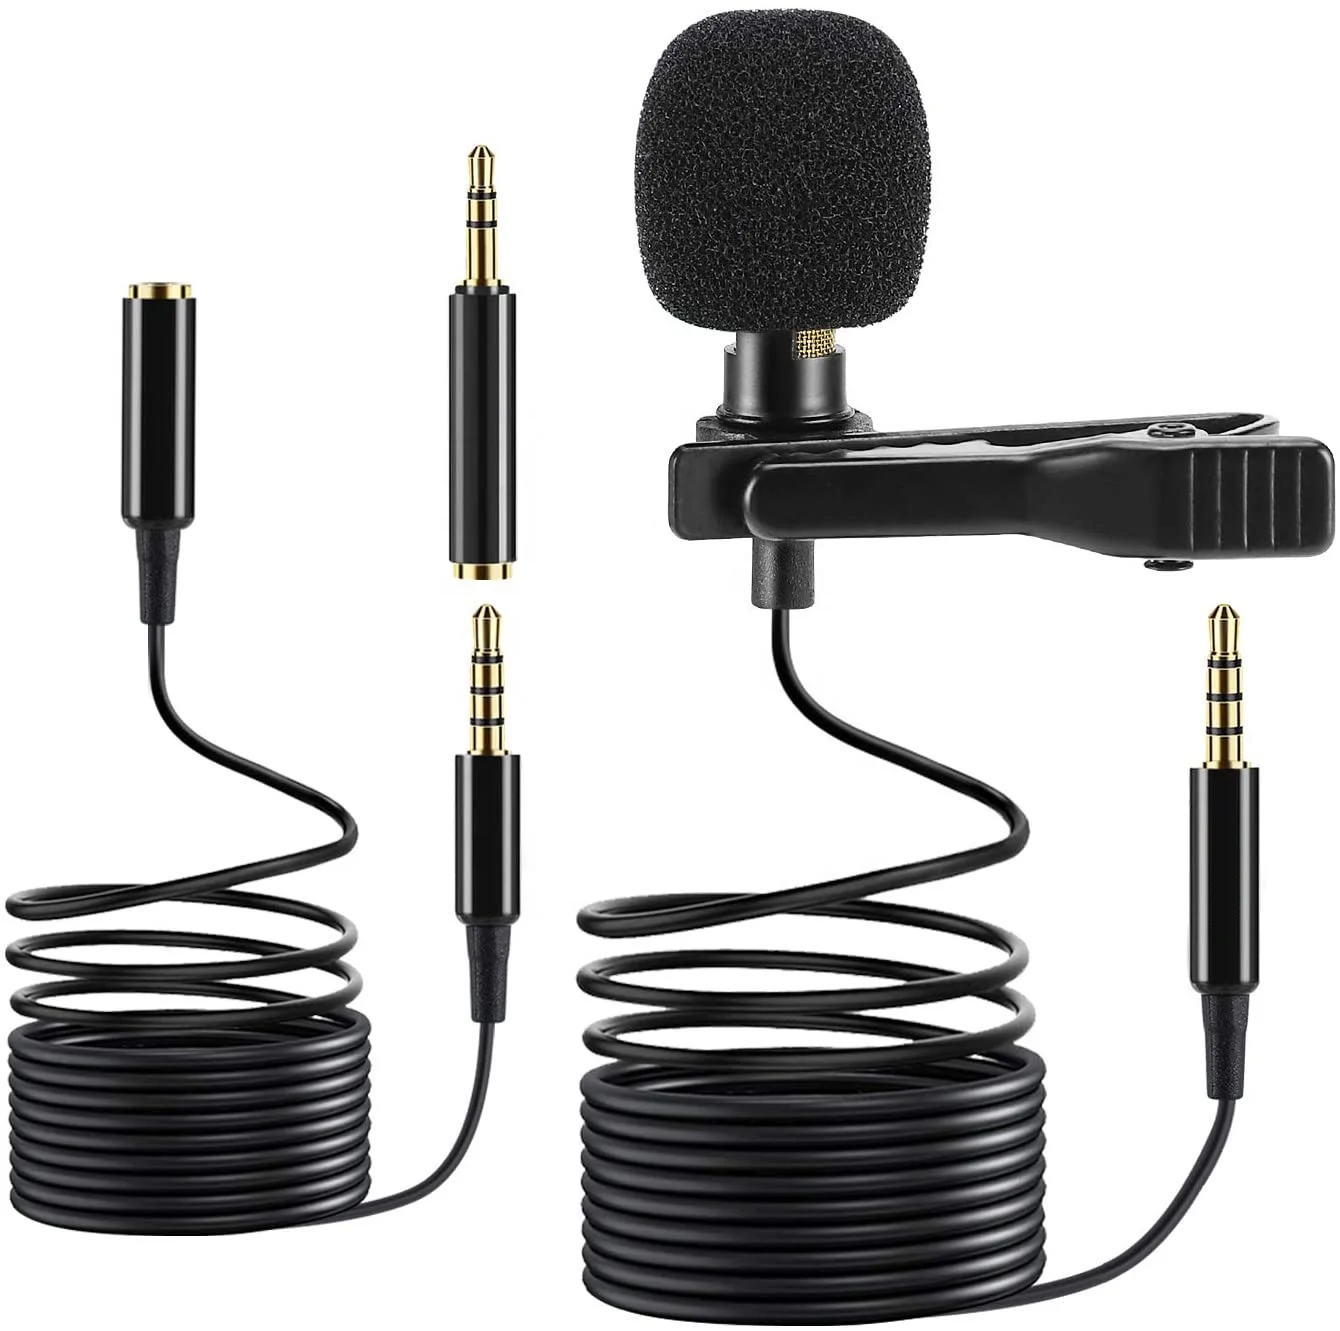 

SM-HT 3.5mm for Live Equipment Smartphone Mic Phone Recording Lapel Camera Lavalier Microphone with Clip, Black